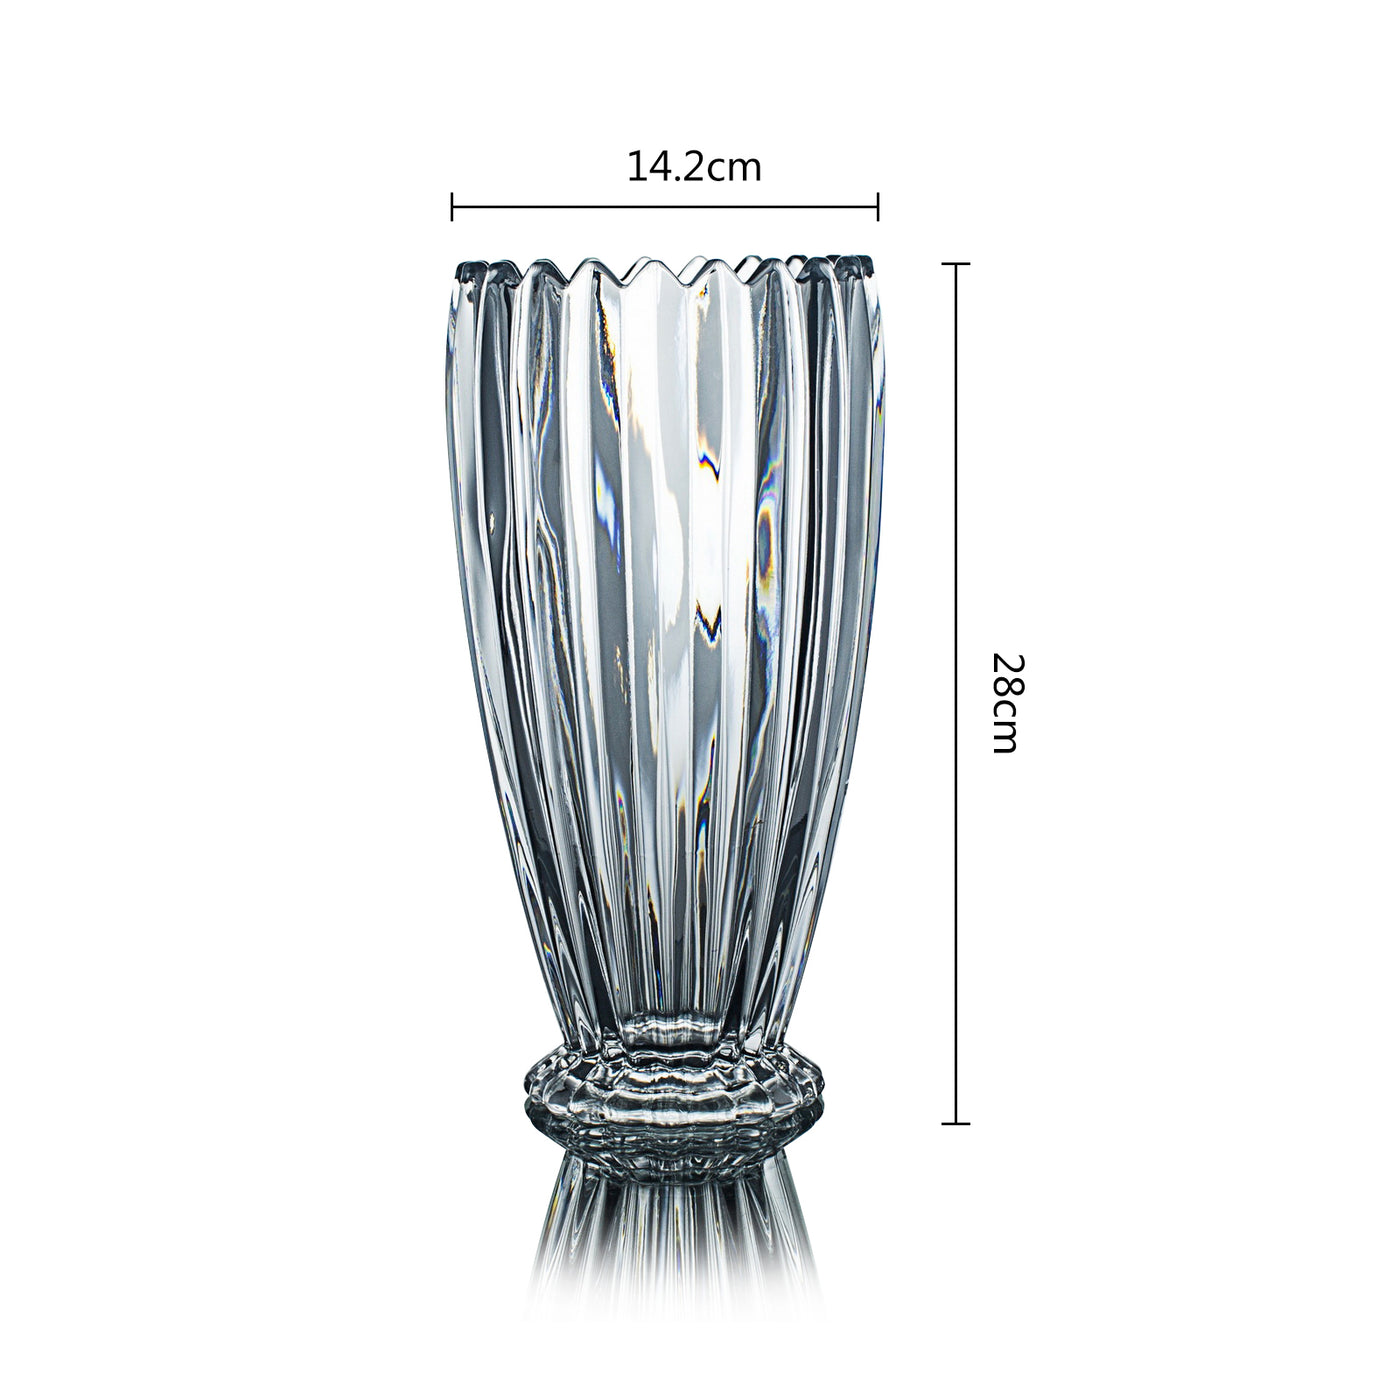 Crystal Vases for Flowers 11" Tall Glass Centerpieces Living Room Wedding Decor